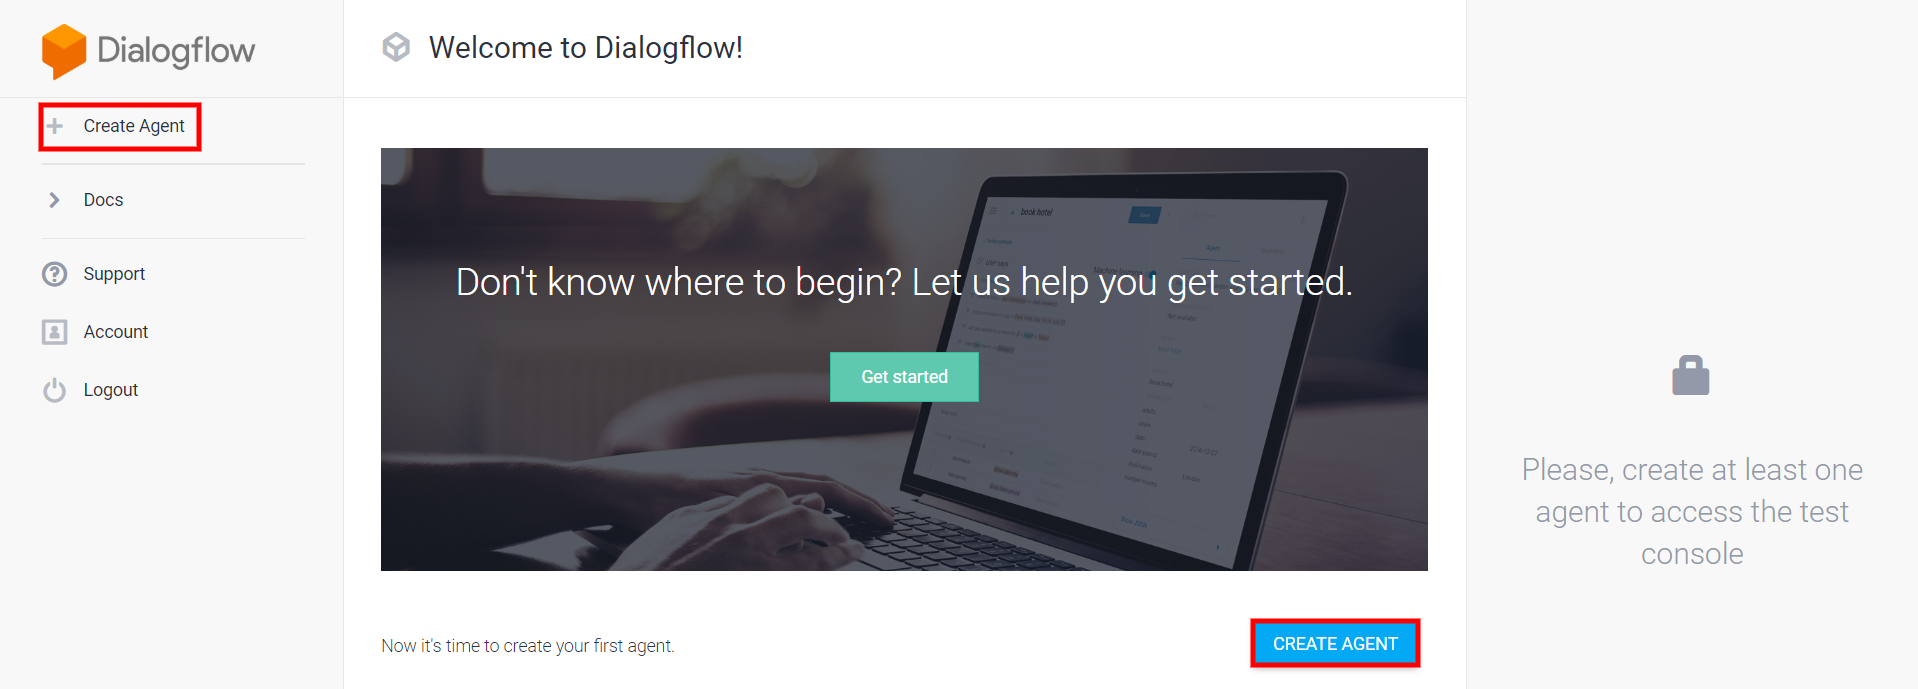 The welcome page for Dialogflow